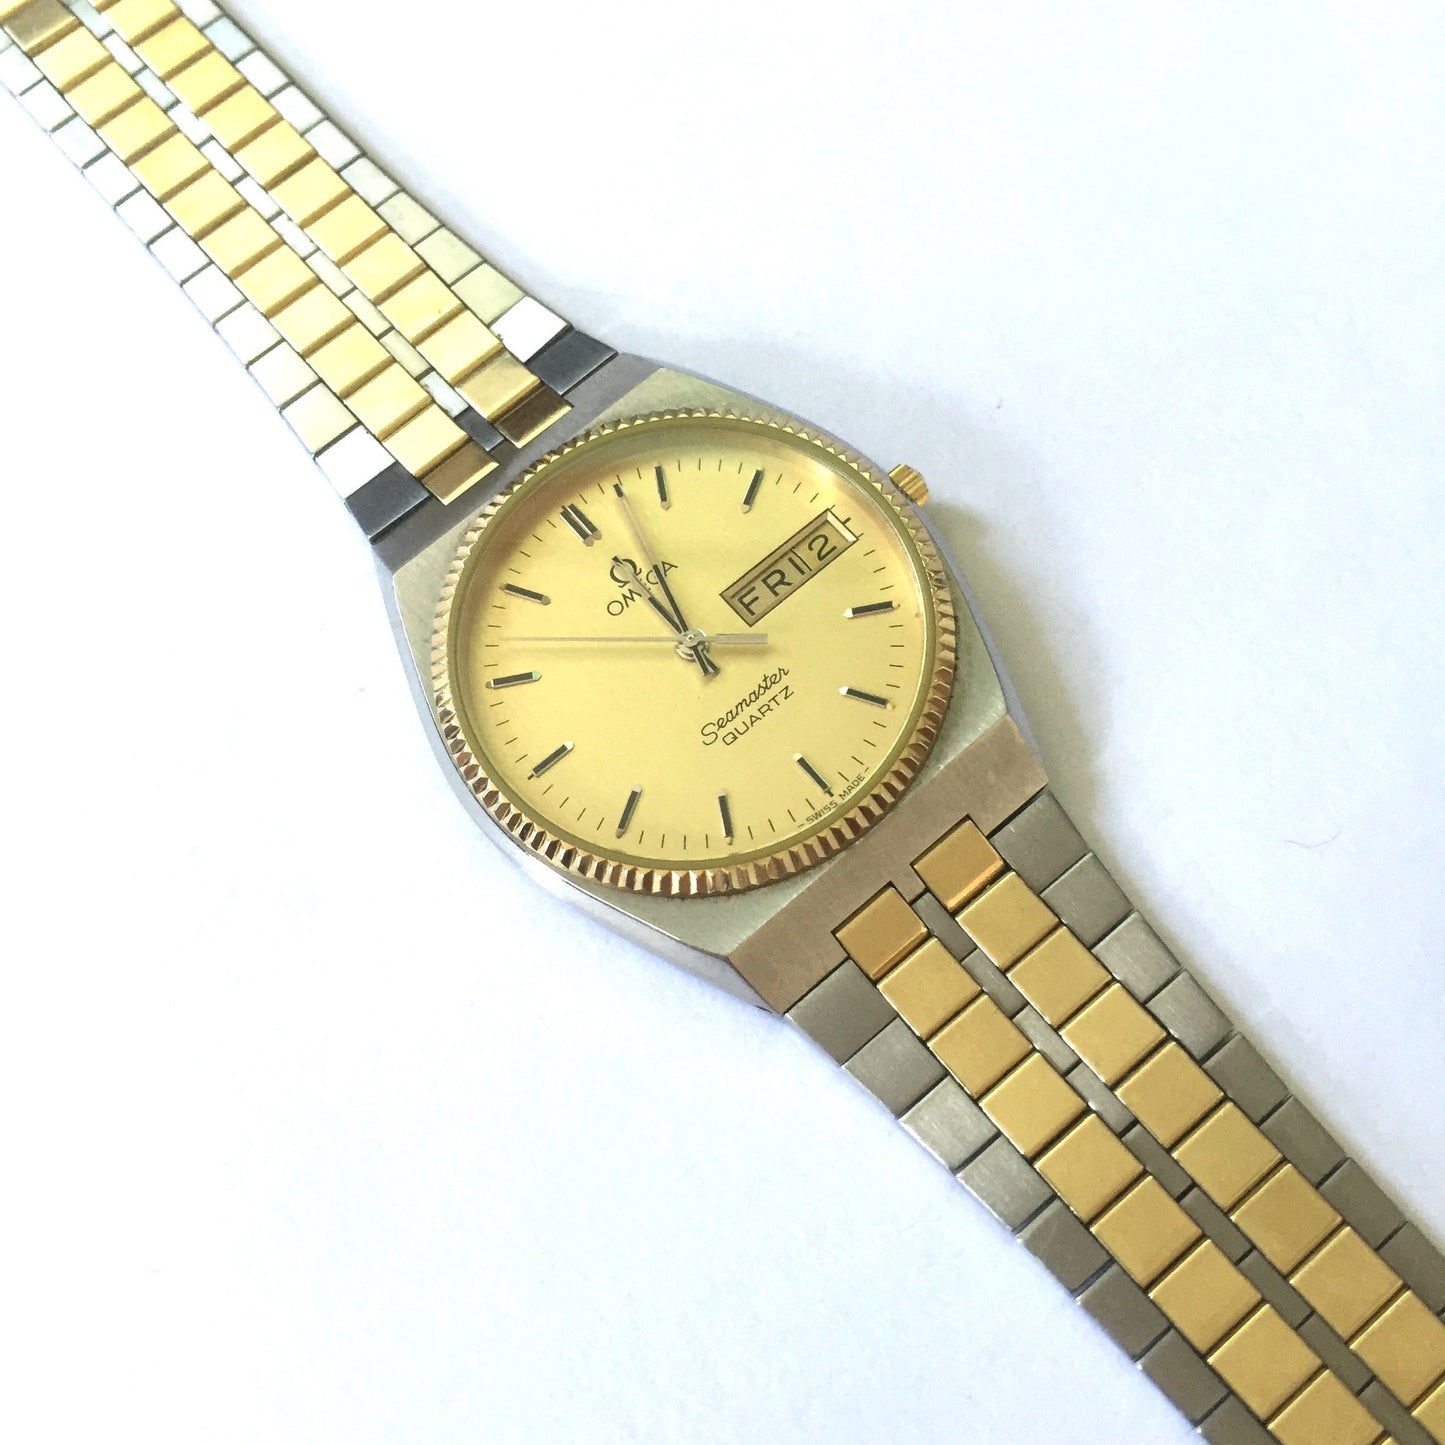 Omega - Seamaster Day-Date 18K/SS Watch